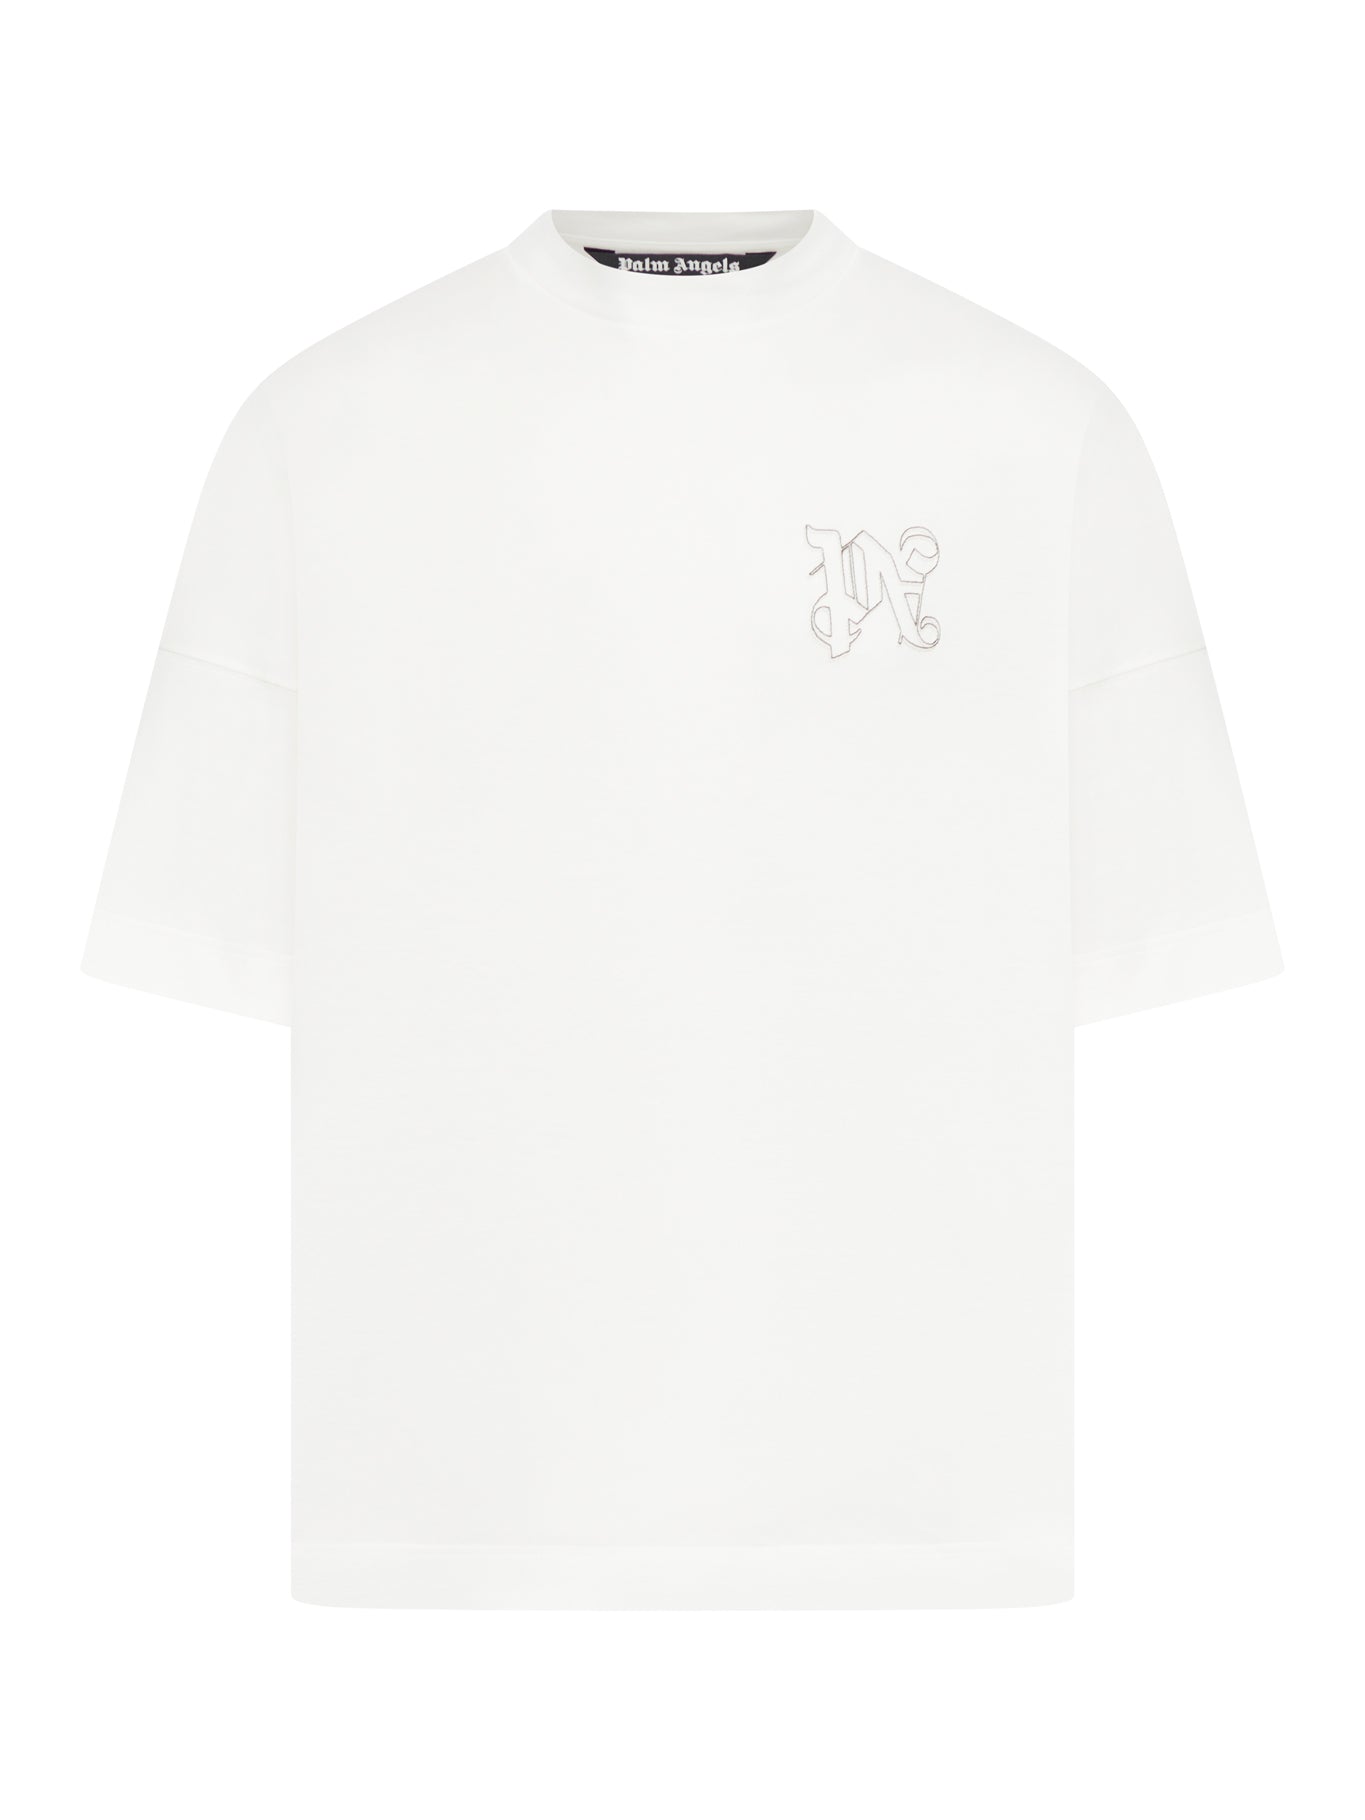 T-shirt with PA Monogram embroidery